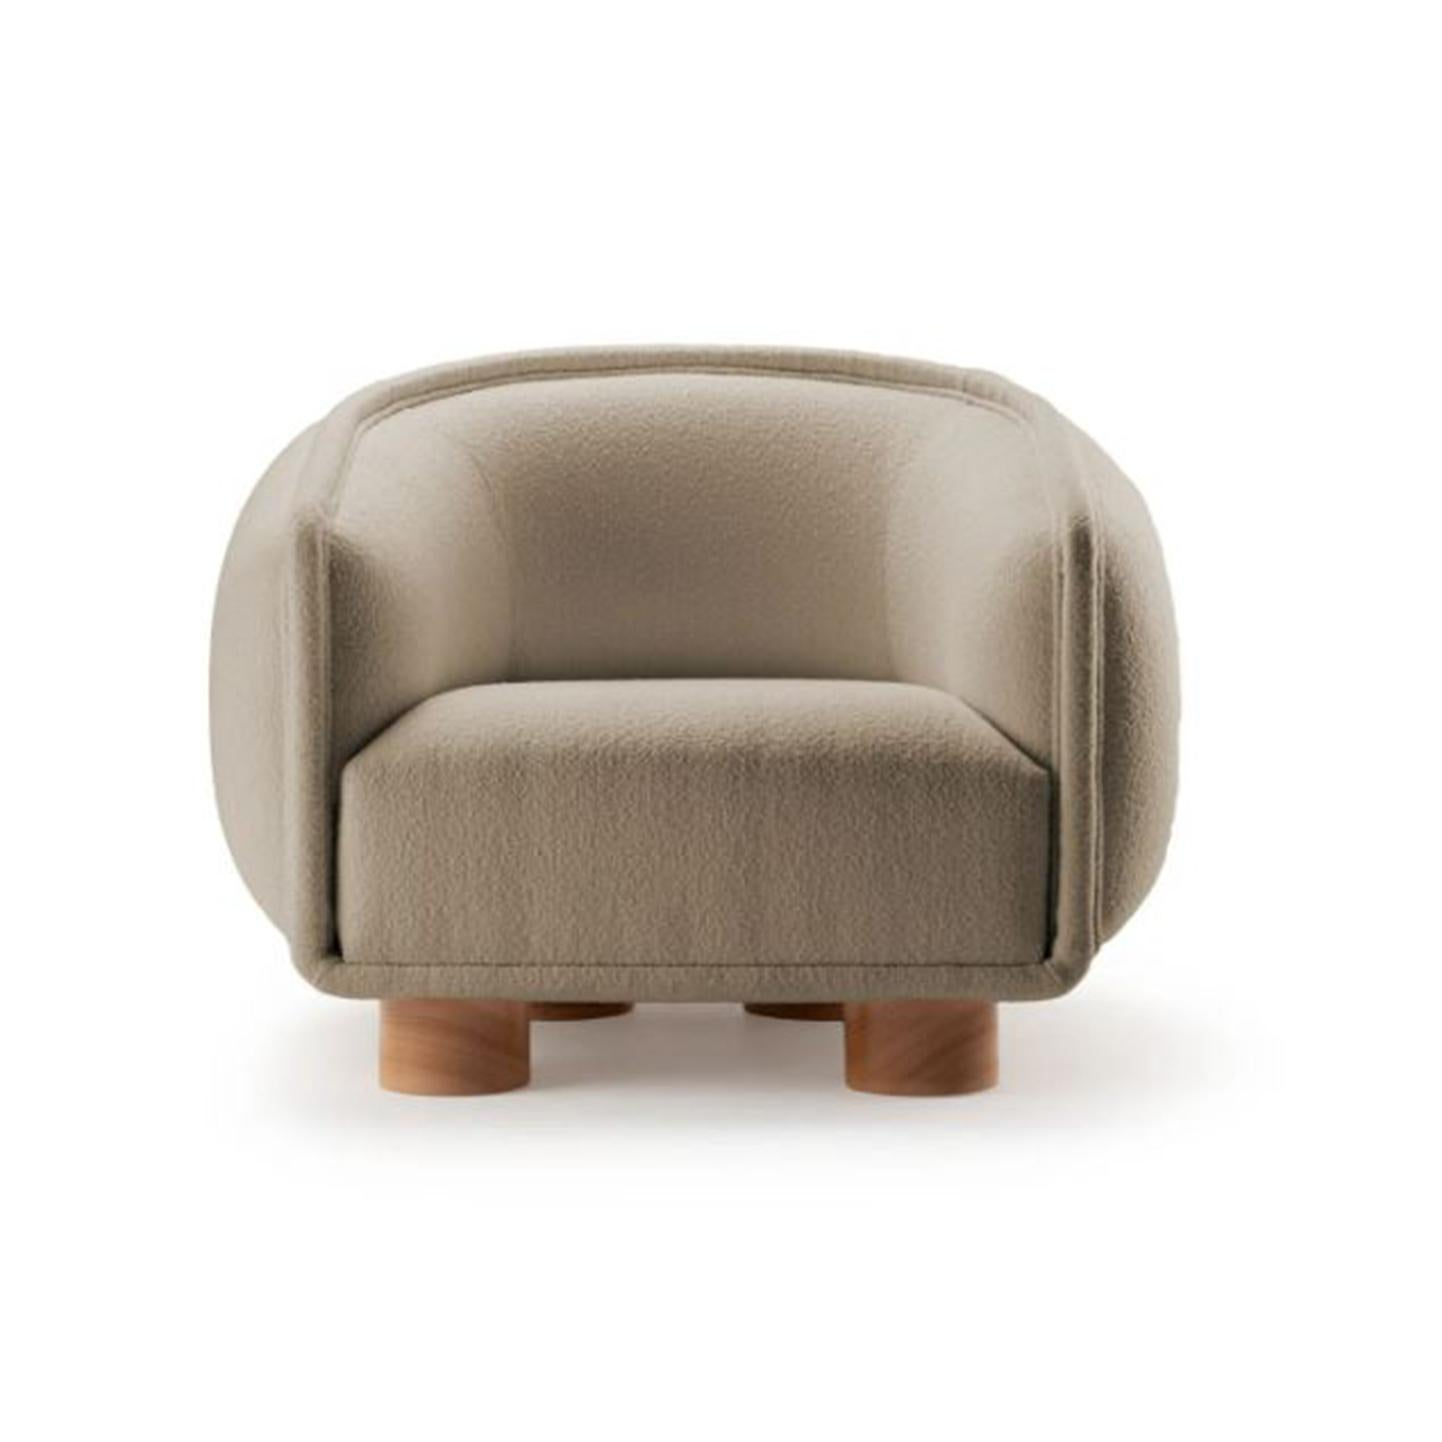 Like a warm embrace, Charlie armchair welcomes you to stay within and relax. An elevated homage to postmodern design that radiates through its unusual proportions and strong curves with softness and fine detailing resulting in a must-have